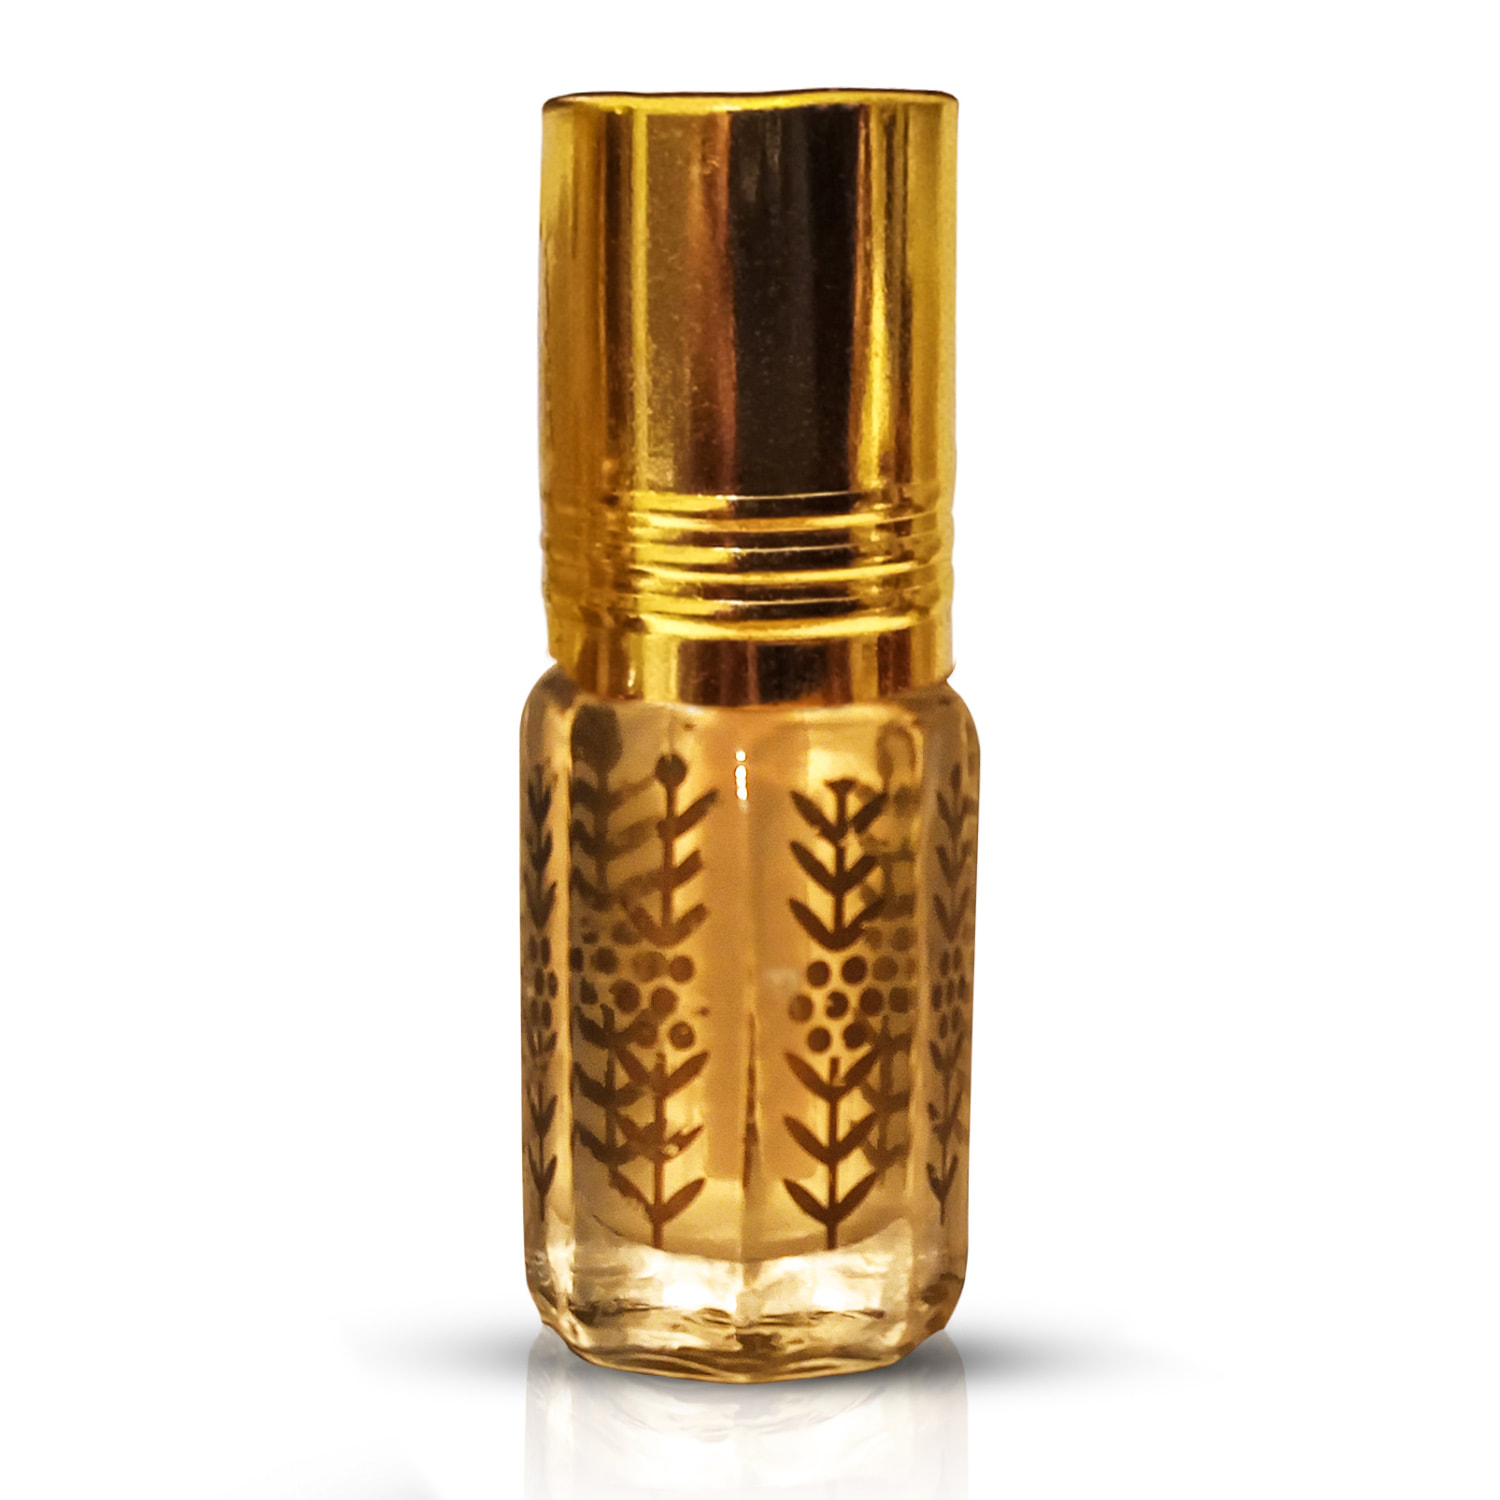 Amber Musk Oil Perfume, Buy 3 Get 1 Free Save 18.00, Free Shipping